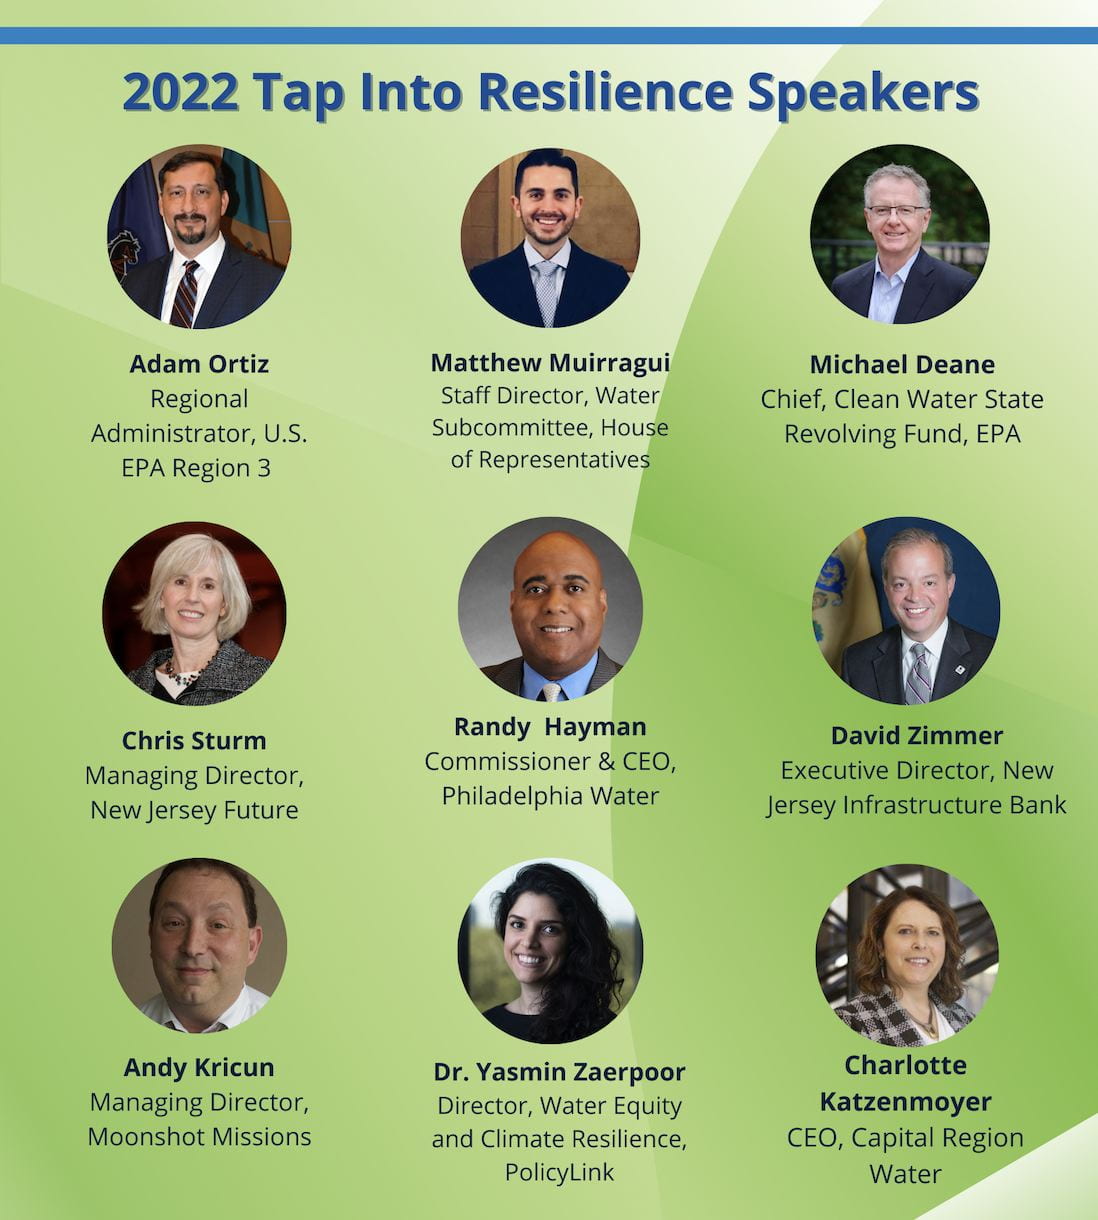 Tap into Resilience